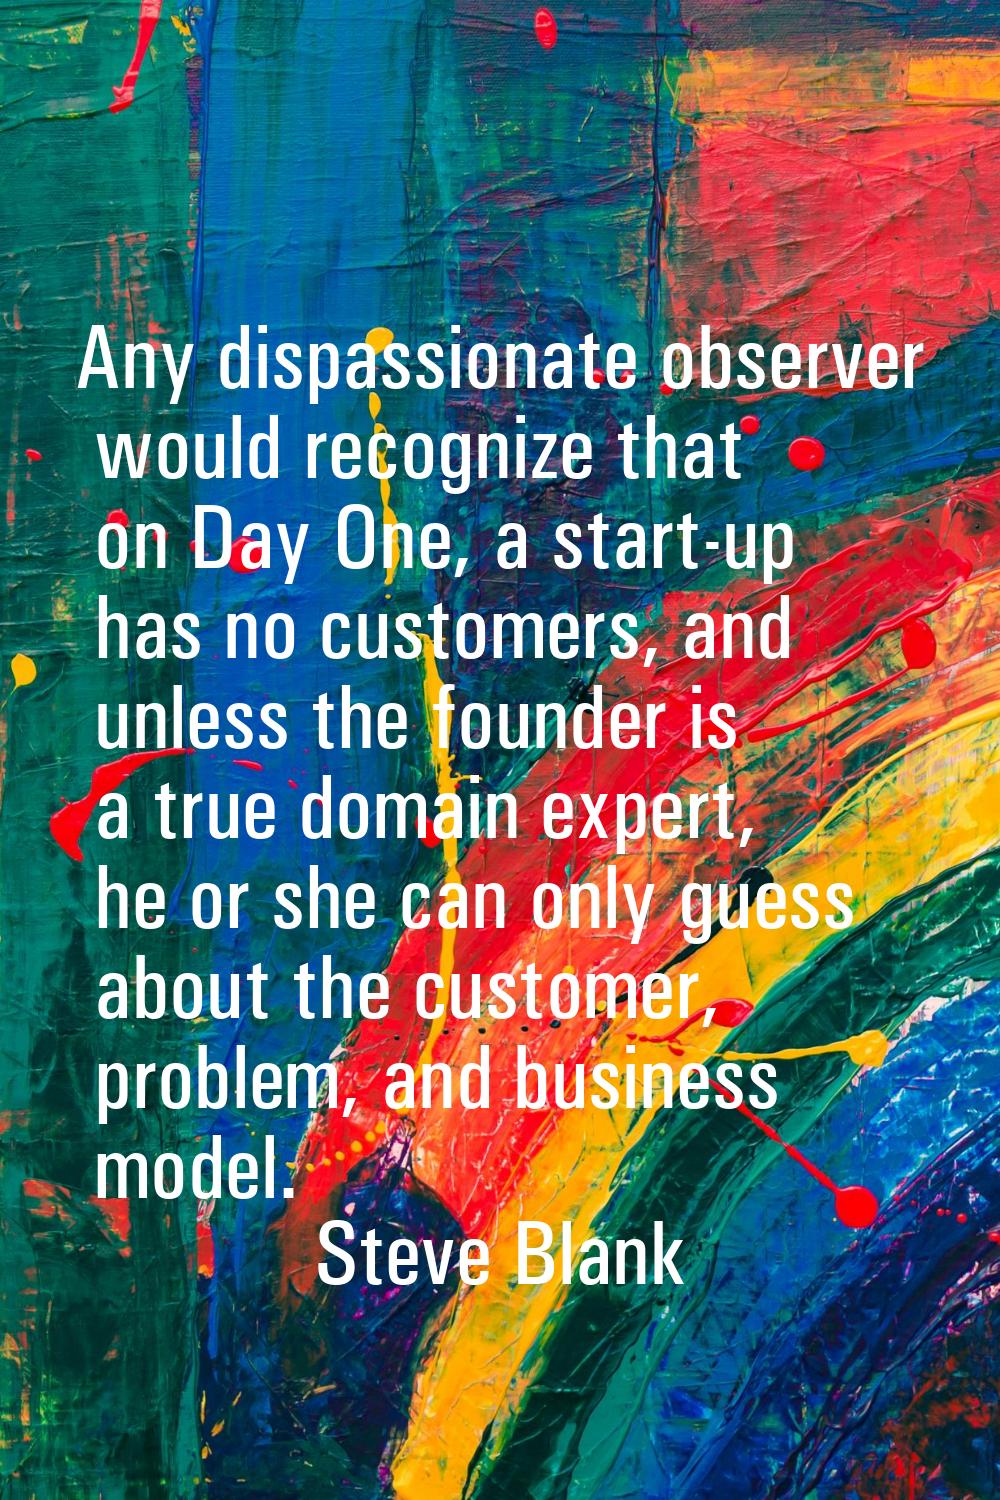 Any dispassionate observer would recognize that on Day One, a start-up has no customers, and unless